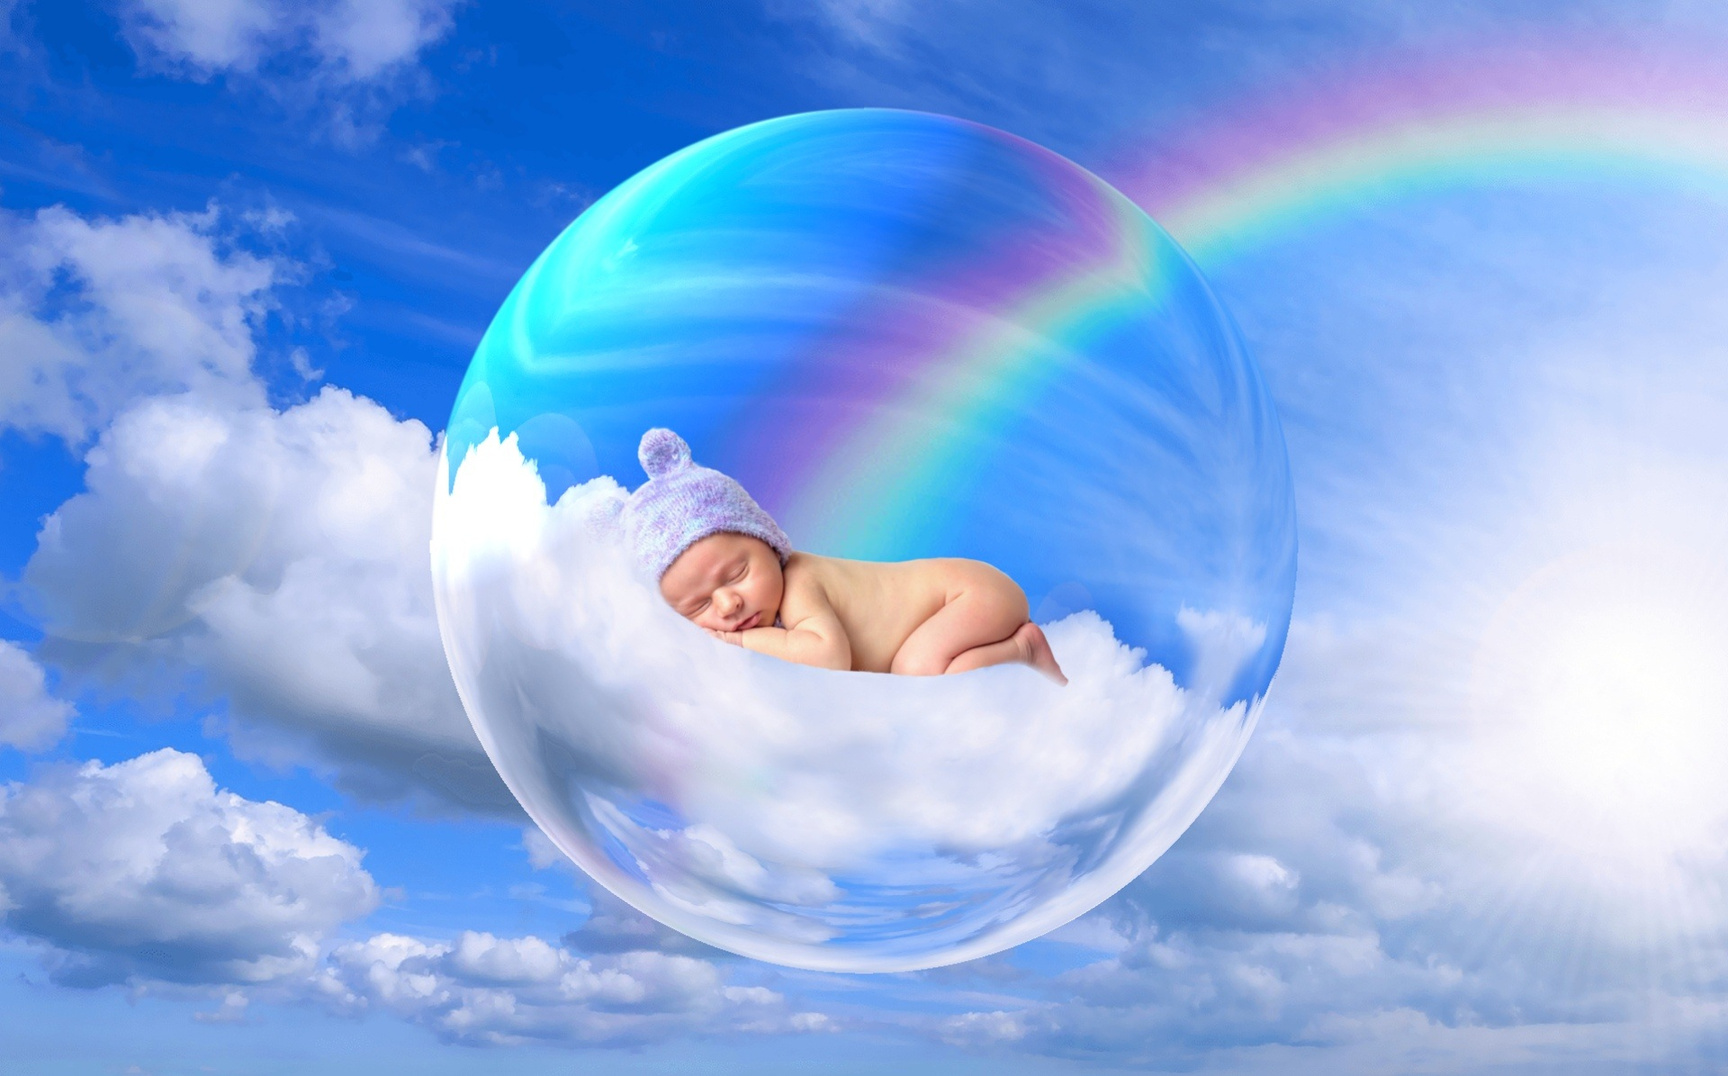 Photomontage Of Baby In A Bubble In The Clouds